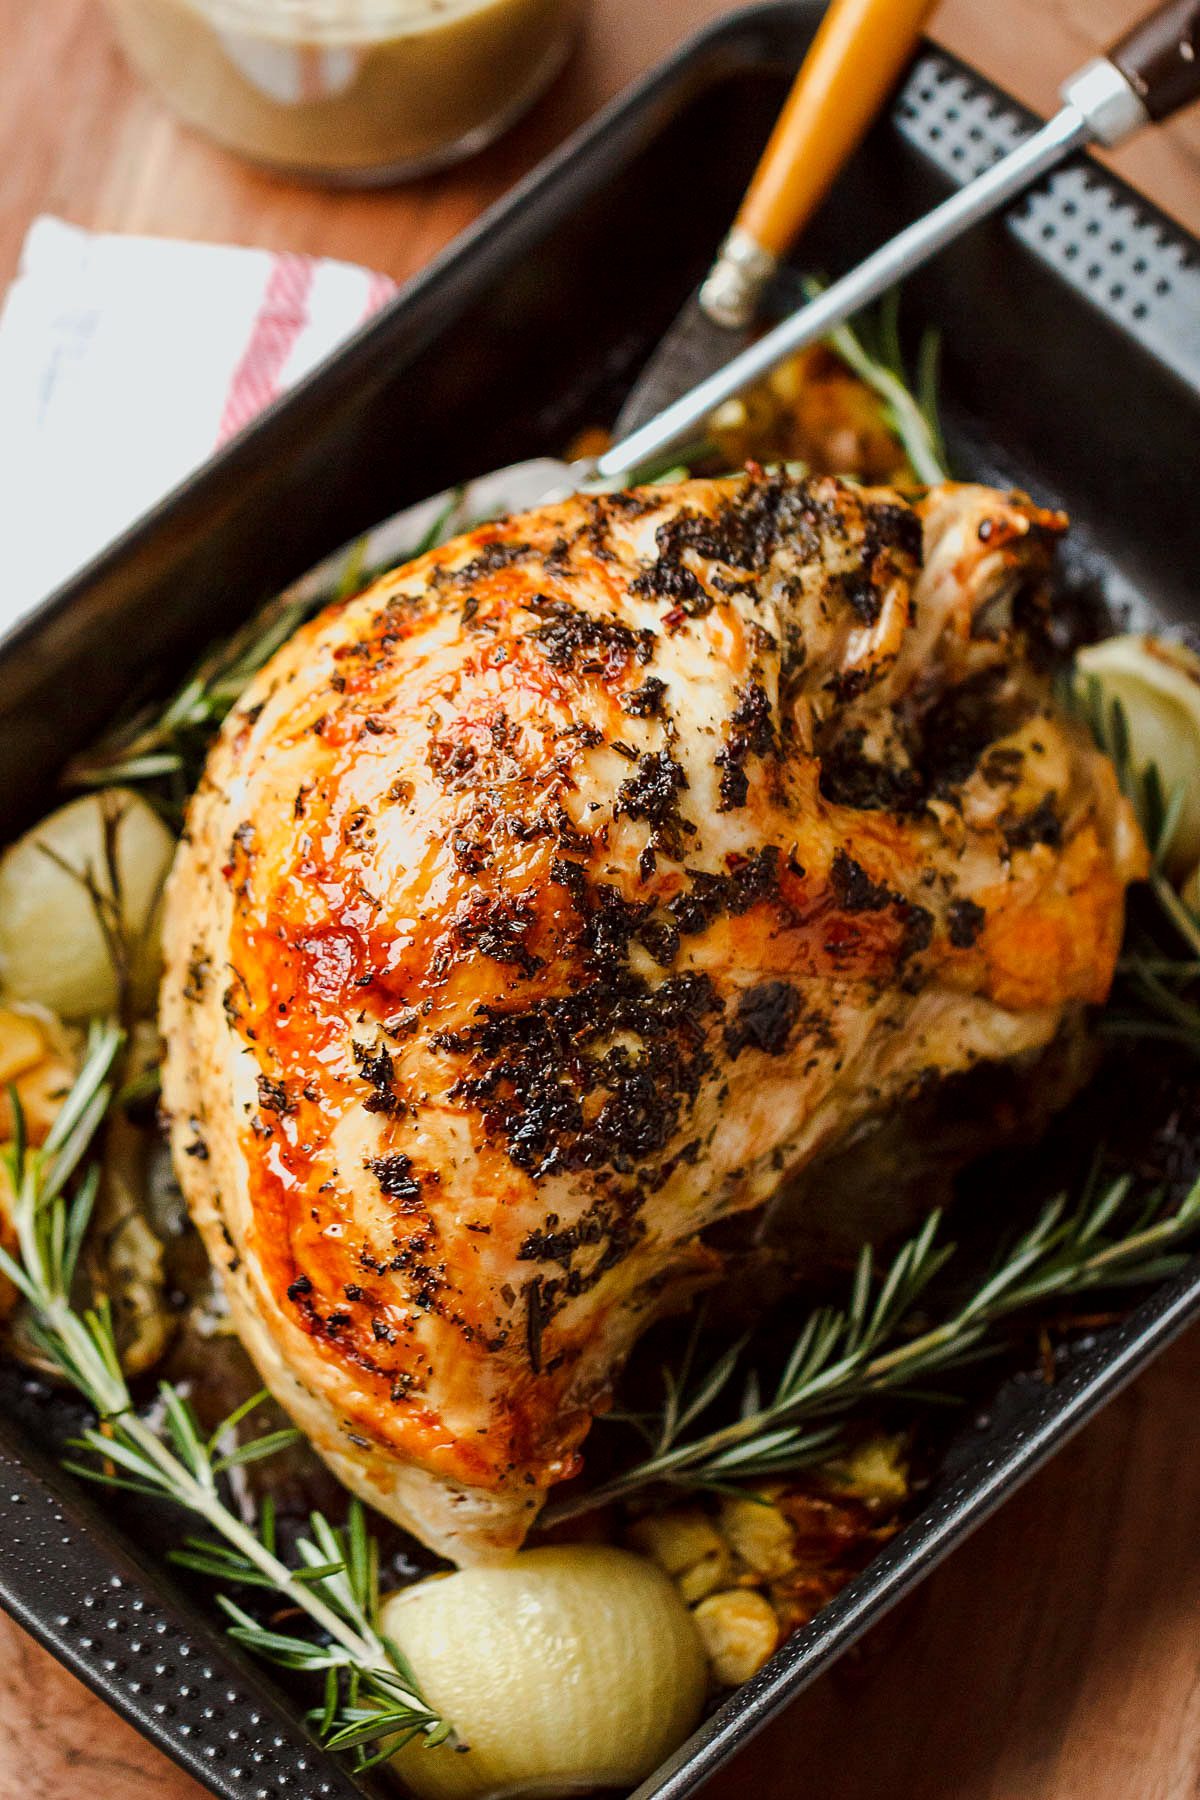 How to Stuff a Turkey breast With Herbed Butter - Here's how to make the juiciest, most tender, and most flavorful roasted turkey with herb butter you ever enjoyed!